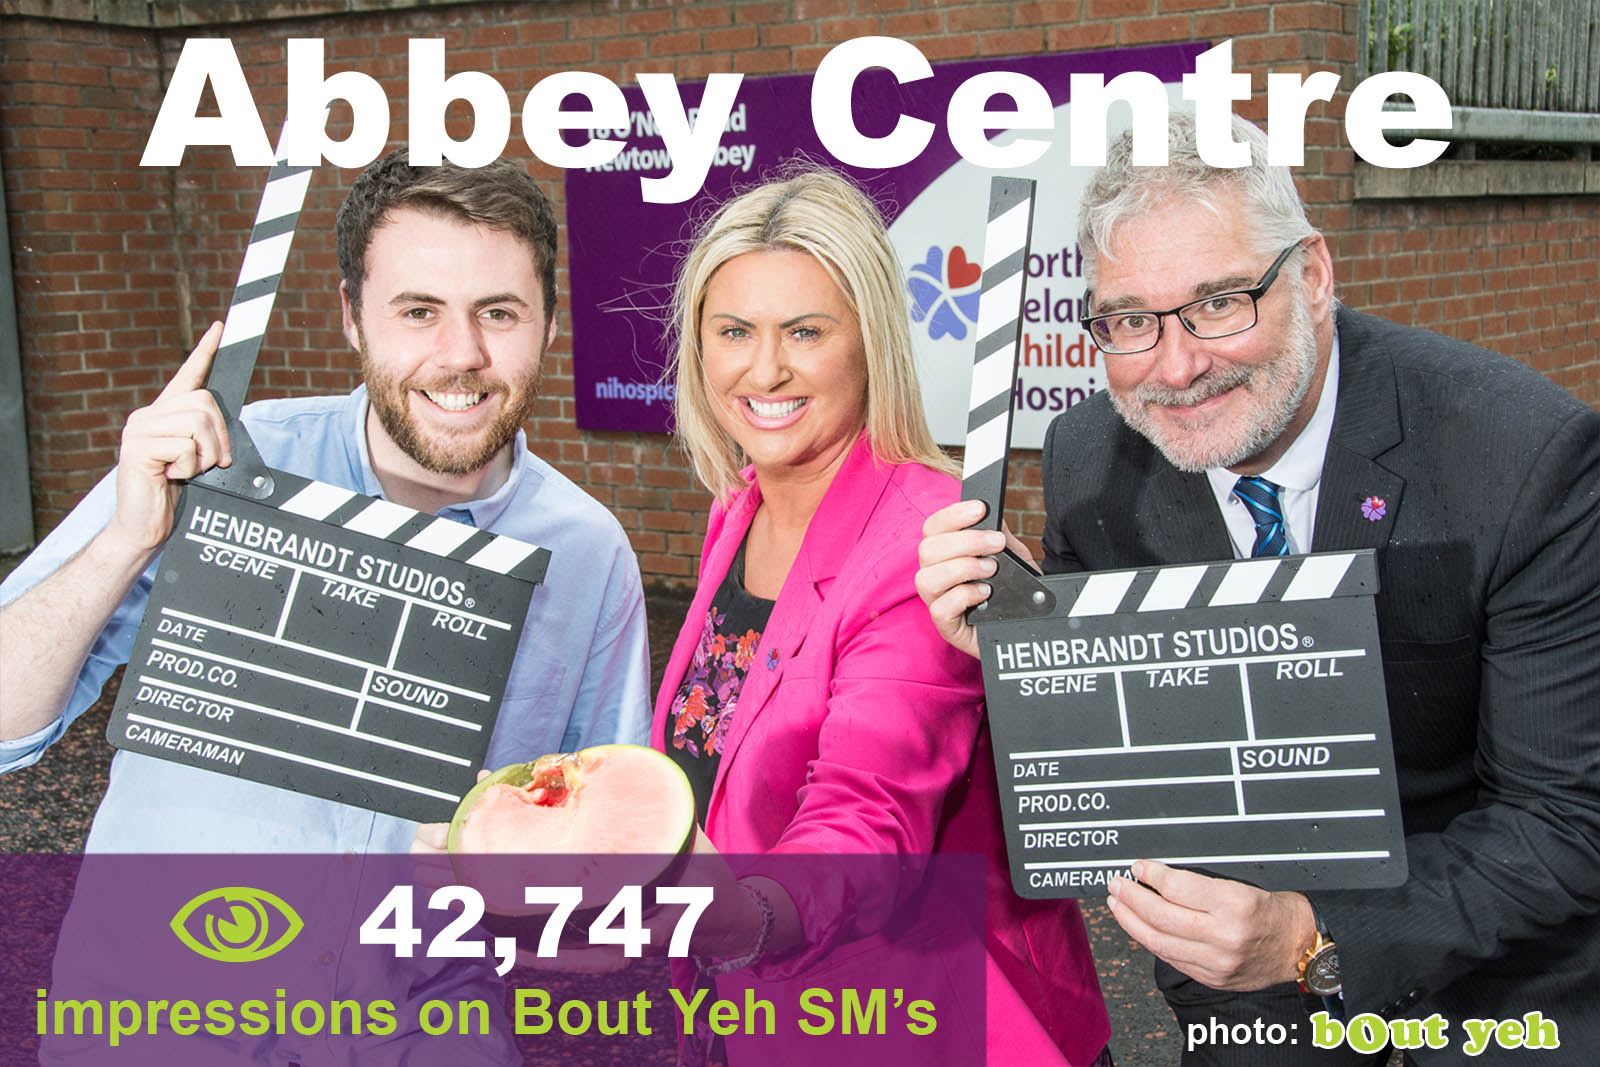 Social Media Marketing Consultants Belfast - Abbey Centre SMM campaign overview photo. Photo by Bout Yeh used in a Social Media Marketing campaign across Bout Yeh's Social Media platforms for Abbey Centre Northern Ireland.